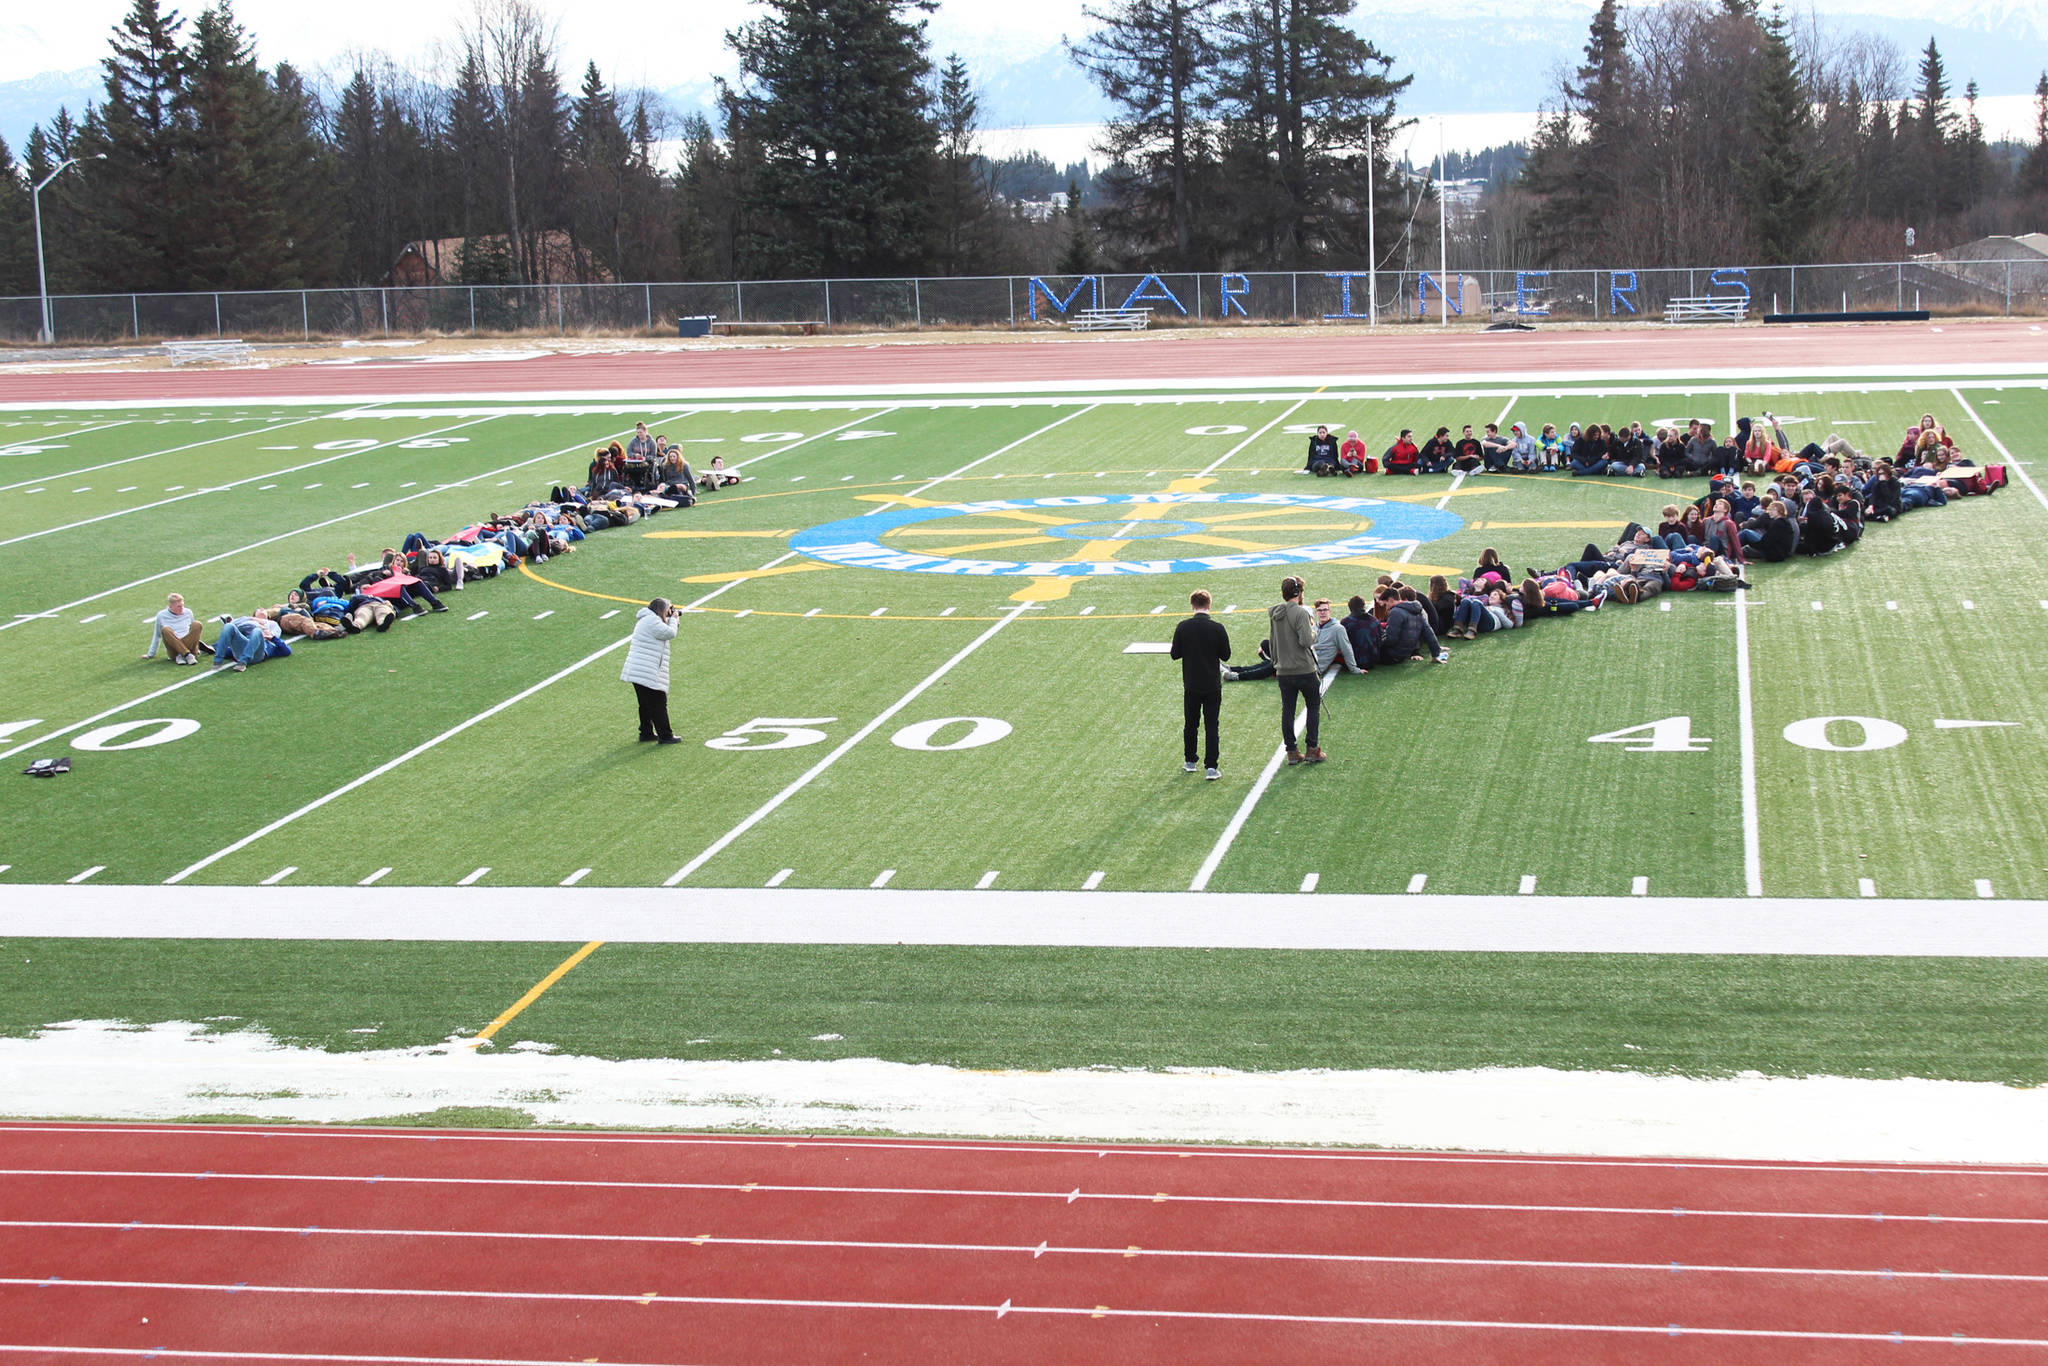 About 100 Homer High School students lie down on the school’s football field to form the number 17 on Wednesday, Feb. 21, 2018, to honor the students who were killed in the Feb. 14 mass shooting in Parkland, Florida. The Homer students staged a walkout at noon to advocate for safer schools. (Photo by Megan Pacer/Homer News)